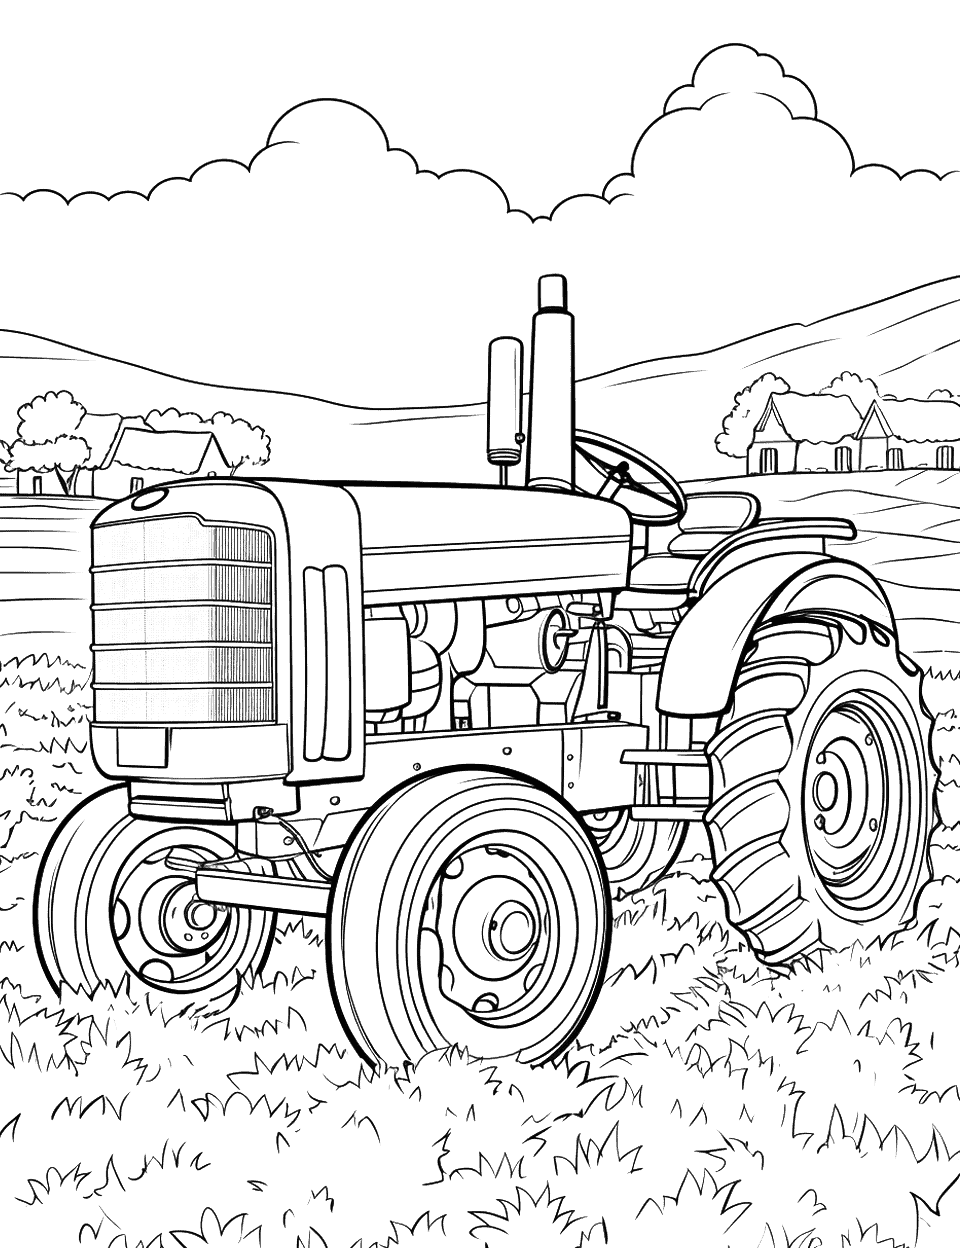 Tractor During Harvest Coloring Page - A tractor in the midst of a busy harvest.